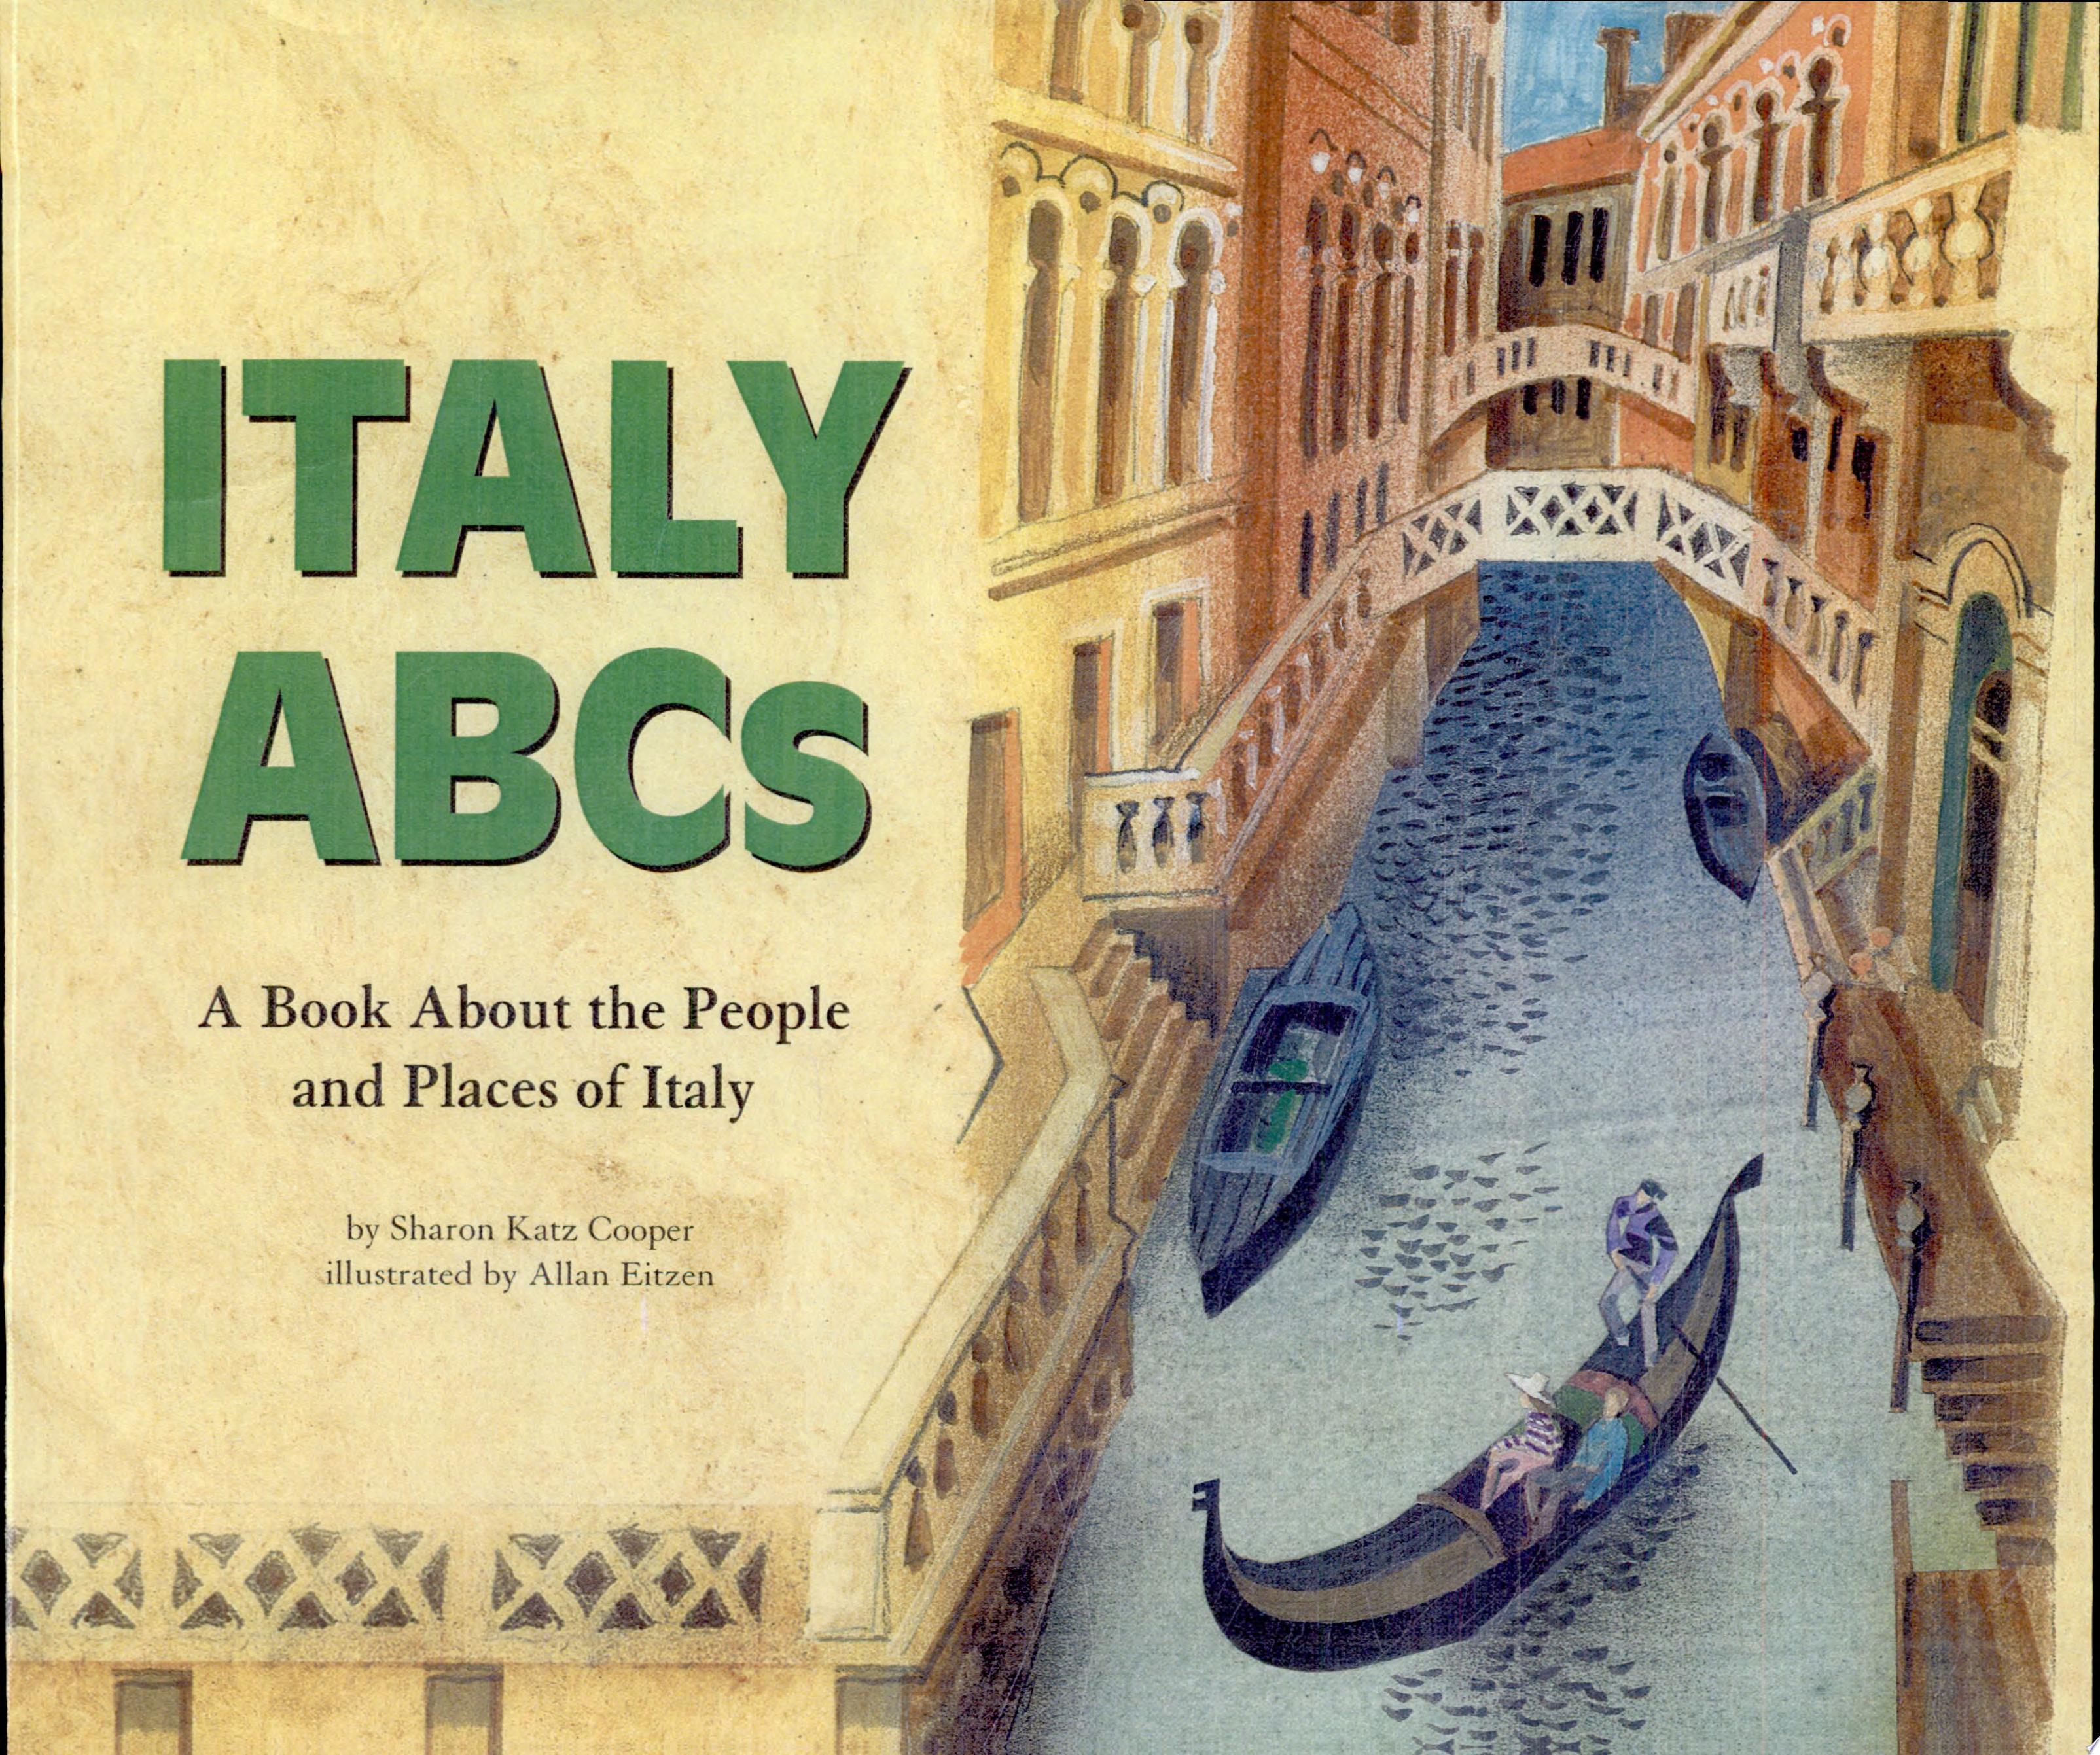 Image for "Italy ABCs"